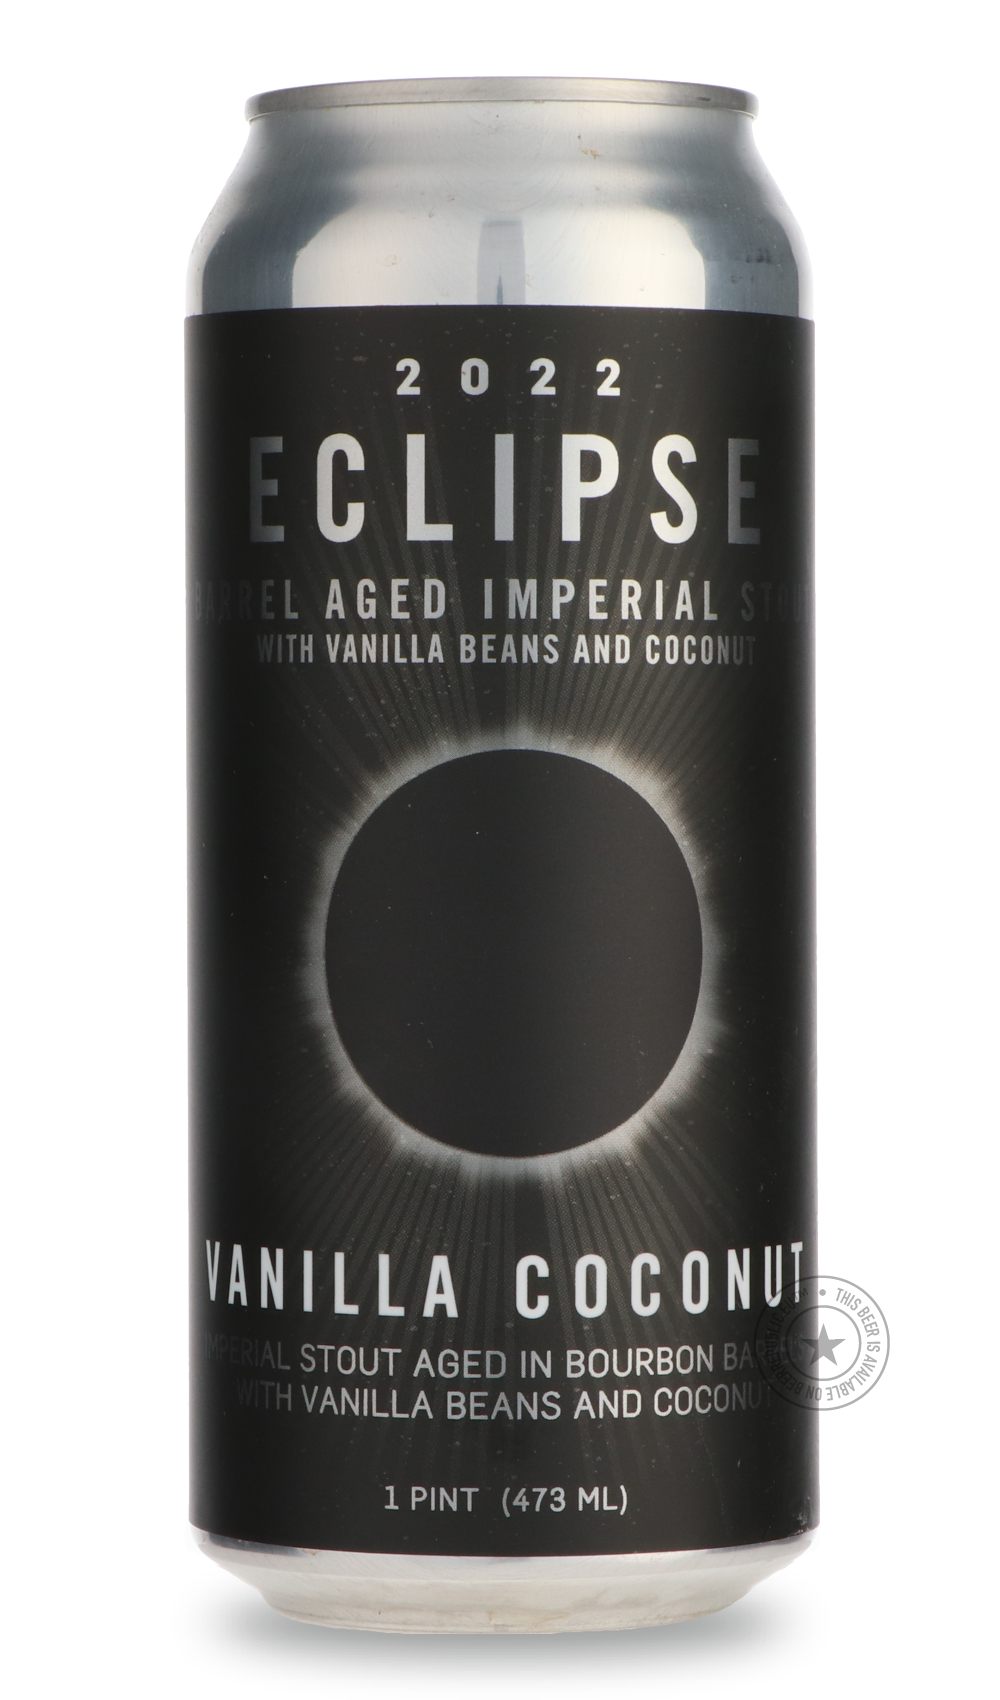 -FiftyFifty- Eclipse - Vanilla Coconut-Stout & Porter- Only @ Beer Republic - The best online beer store for American & Canadian craft beer - Buy beer online from the USA and Canada - Bier online kopen - Amerikaans bier kopen - Craft beer store - Craft beer kopen - Amerikanisch bier kaufen - Bier online kaufen - Acheter biere online - IPA - Stout - Porter - New England IPA - Hazy IPA - Imperial Stout - Barrel Aged - Barrel Aged Imperial Stout - Brown - Dark beer - Blond - Blonde - Pilsner - Lager - Wheat - 